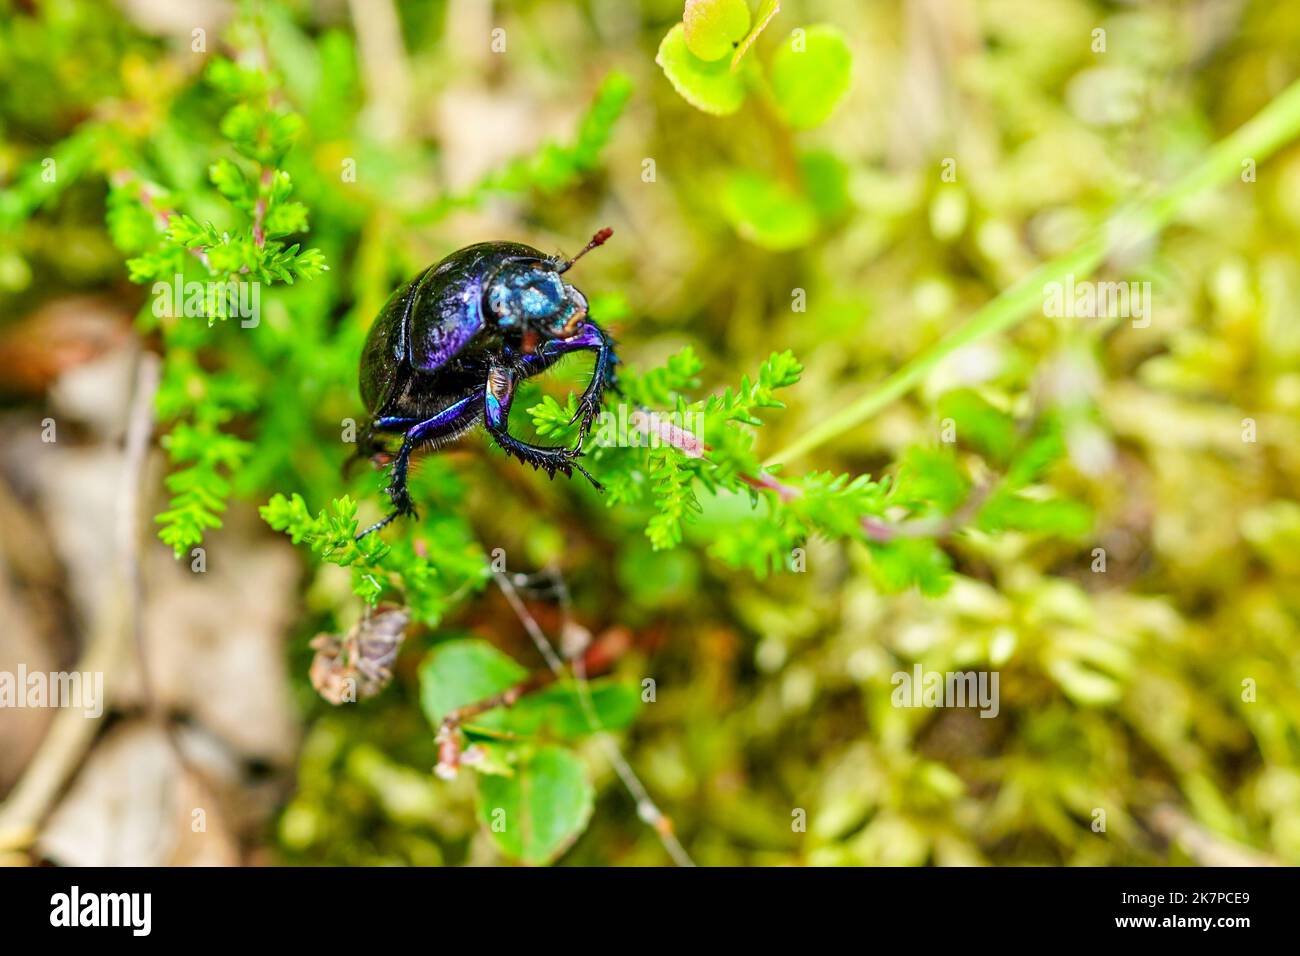 Dor beetle, species of earth-boring dung beetle, Anoplotrupes stercorosus, crawled on a blade of grass, selective focus Stock Photo